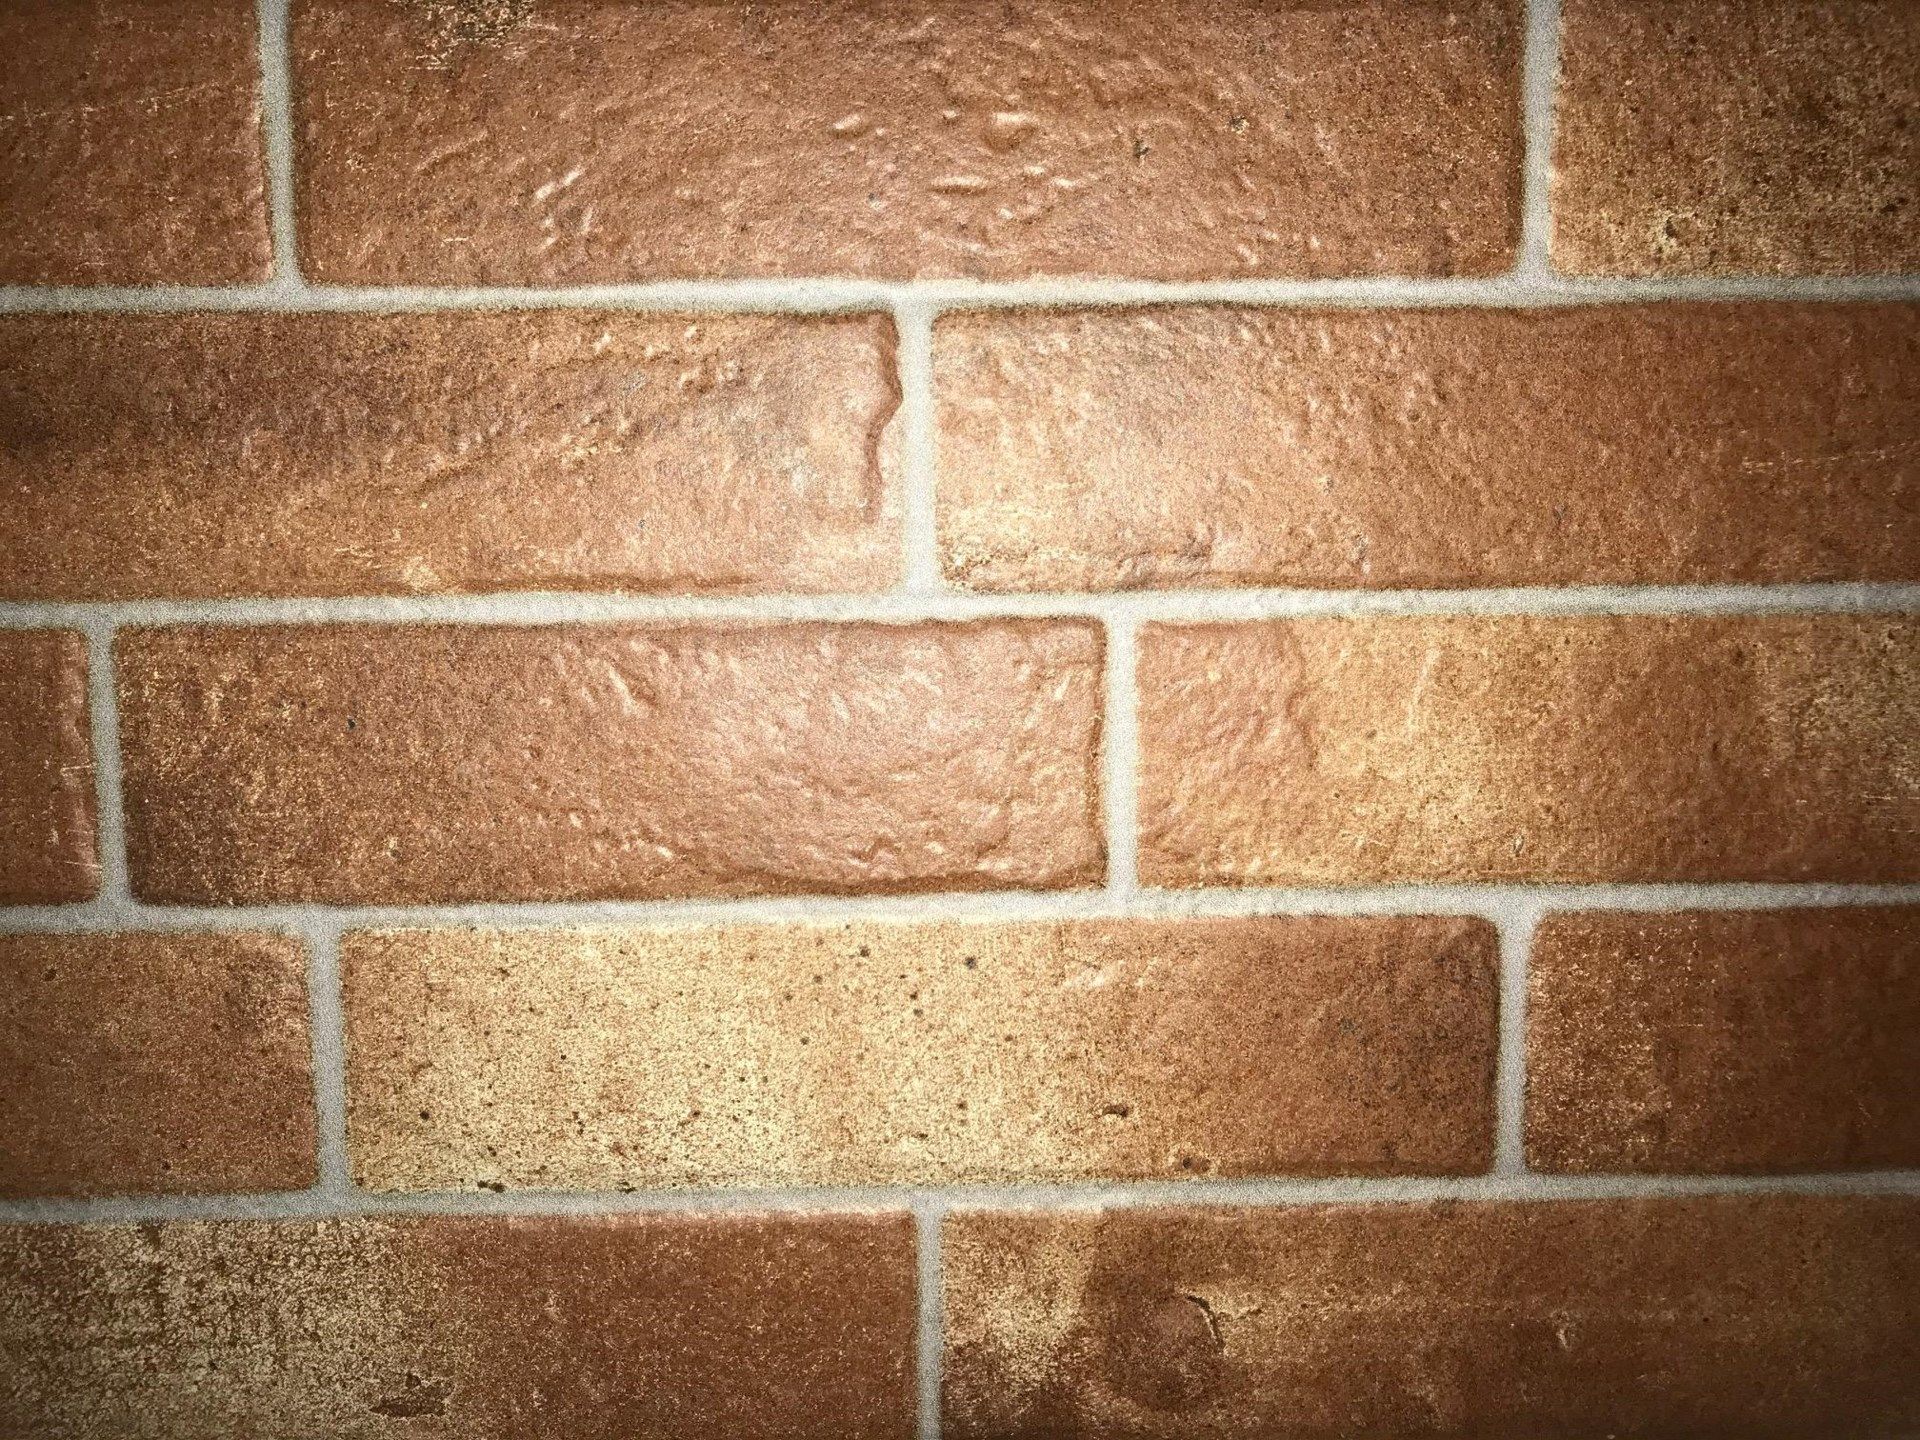 9m2 Modern Brick Effect Ceramic Tiles.25x50cm, Inspired by the raw look of exposed brick walls ... - Image 3 of 5